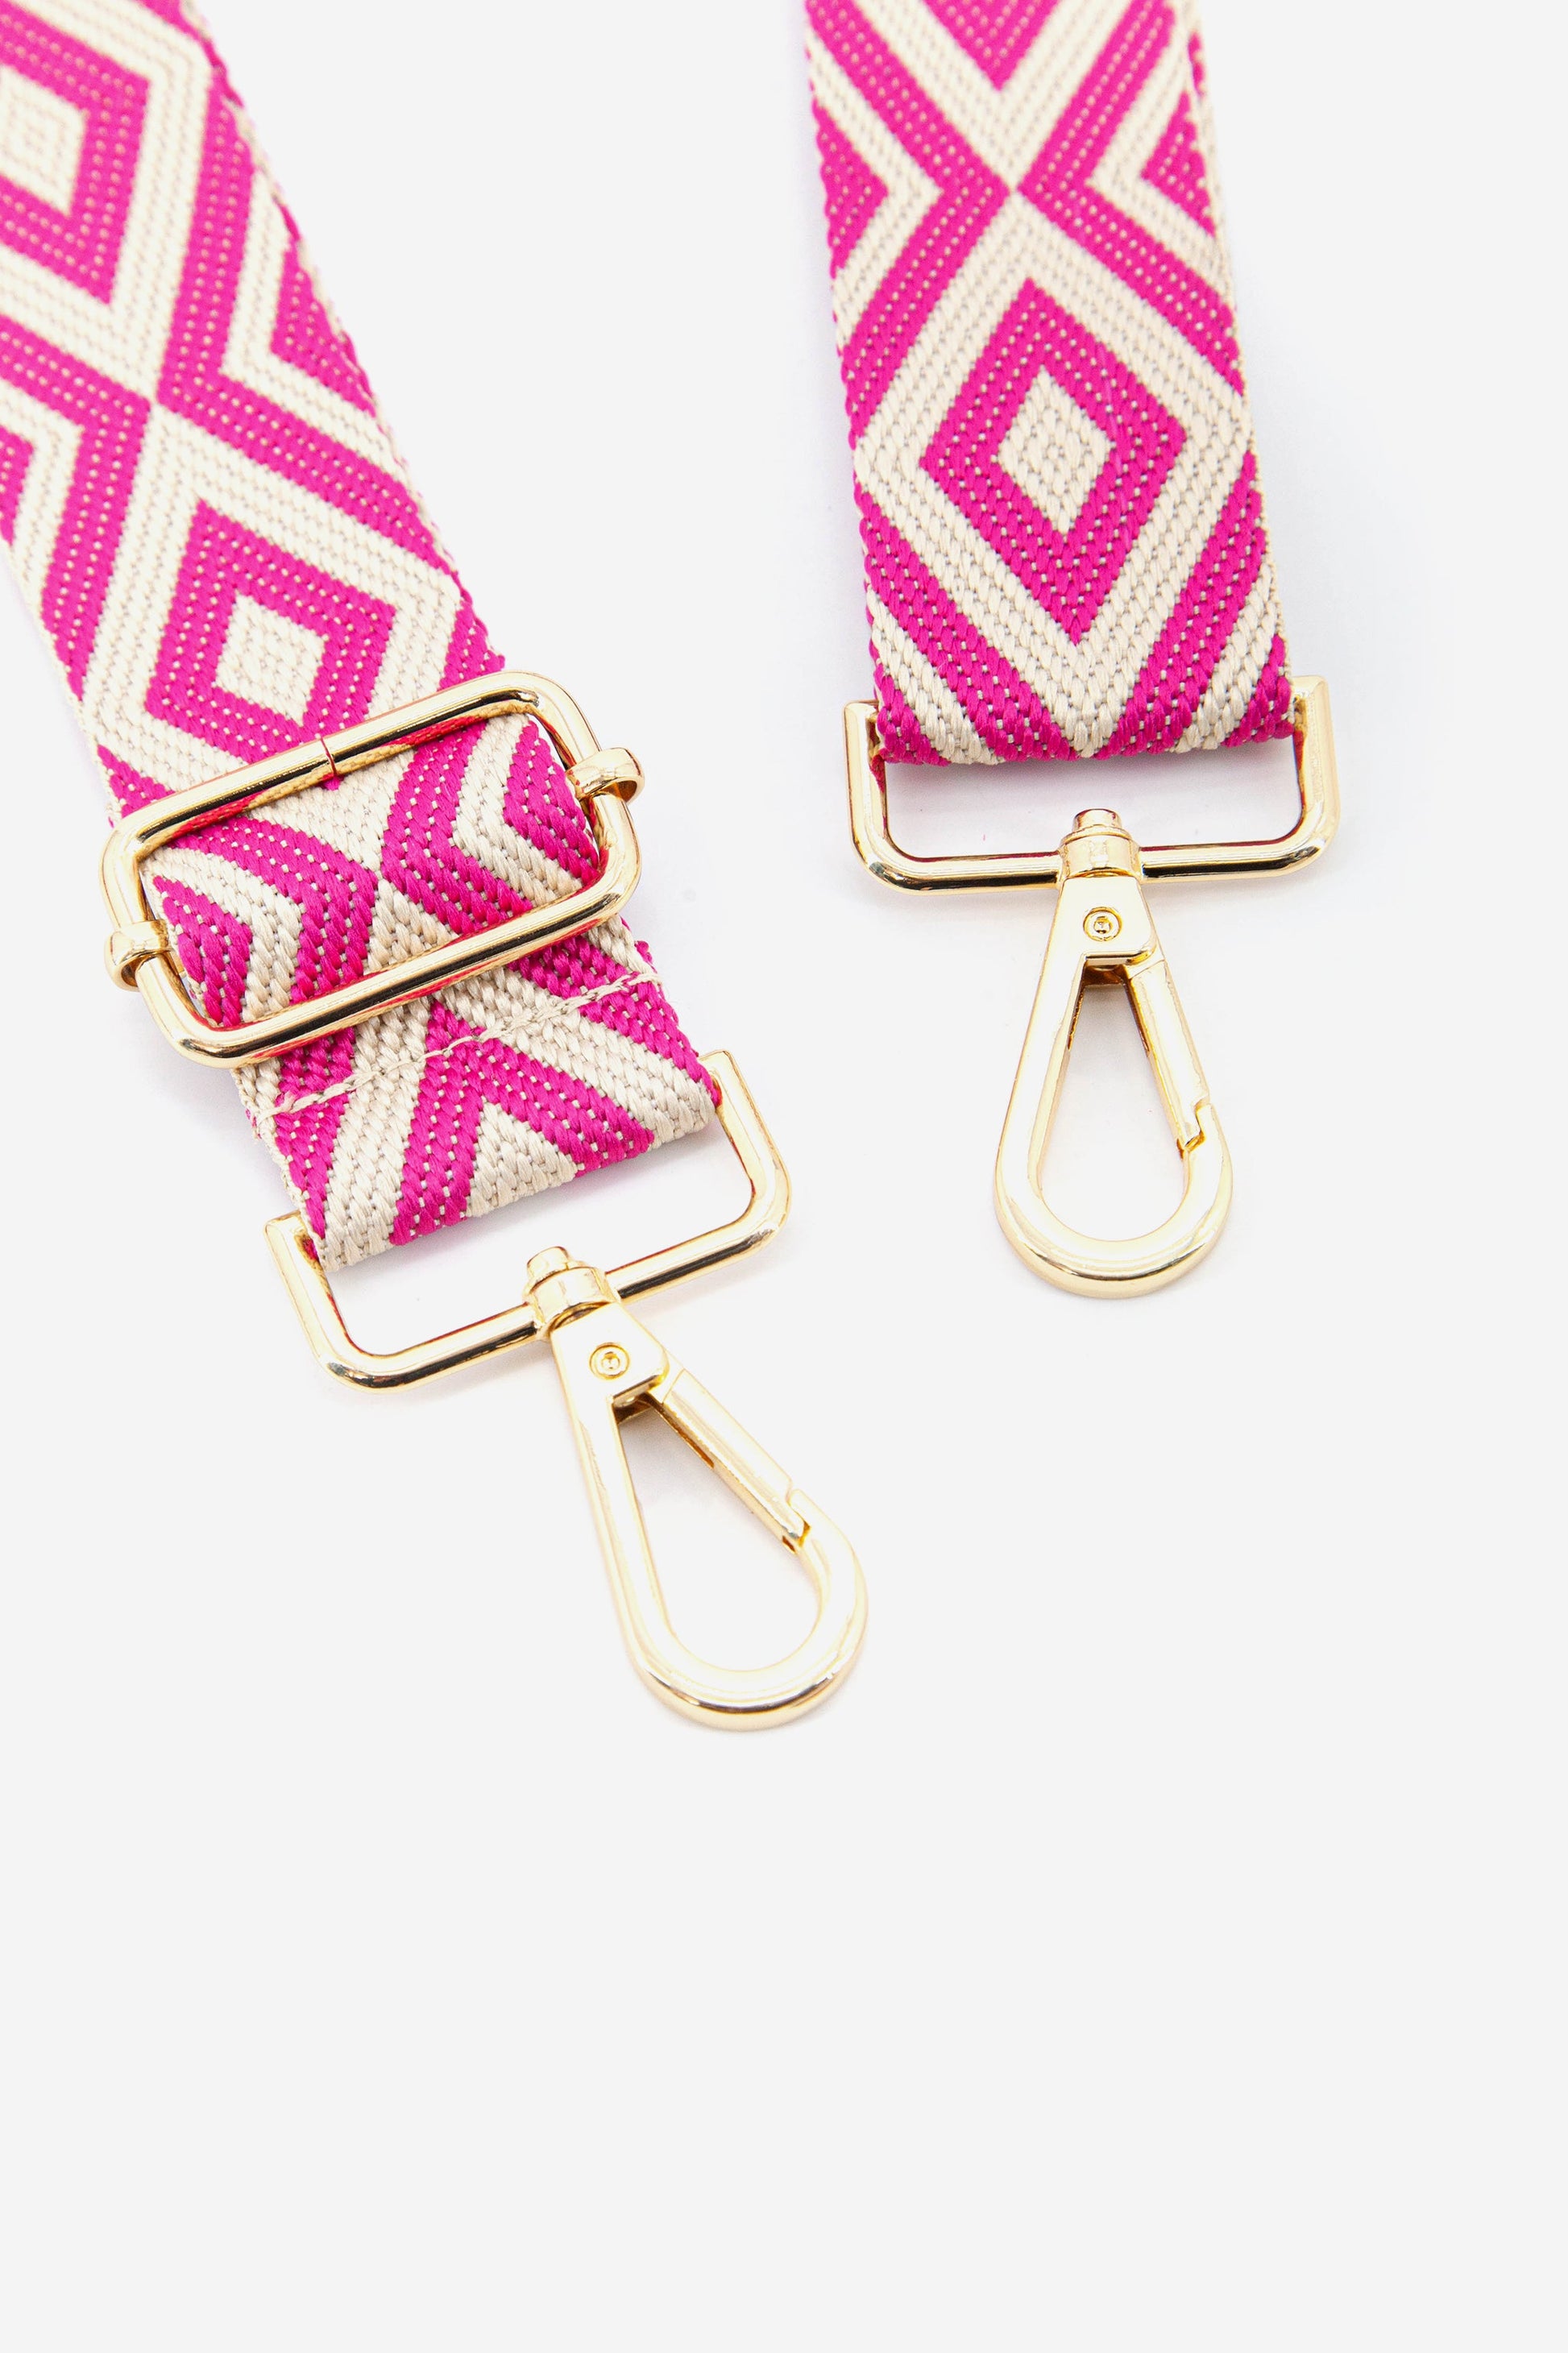 close up of the gold snap hooks and the pink geometric pattern